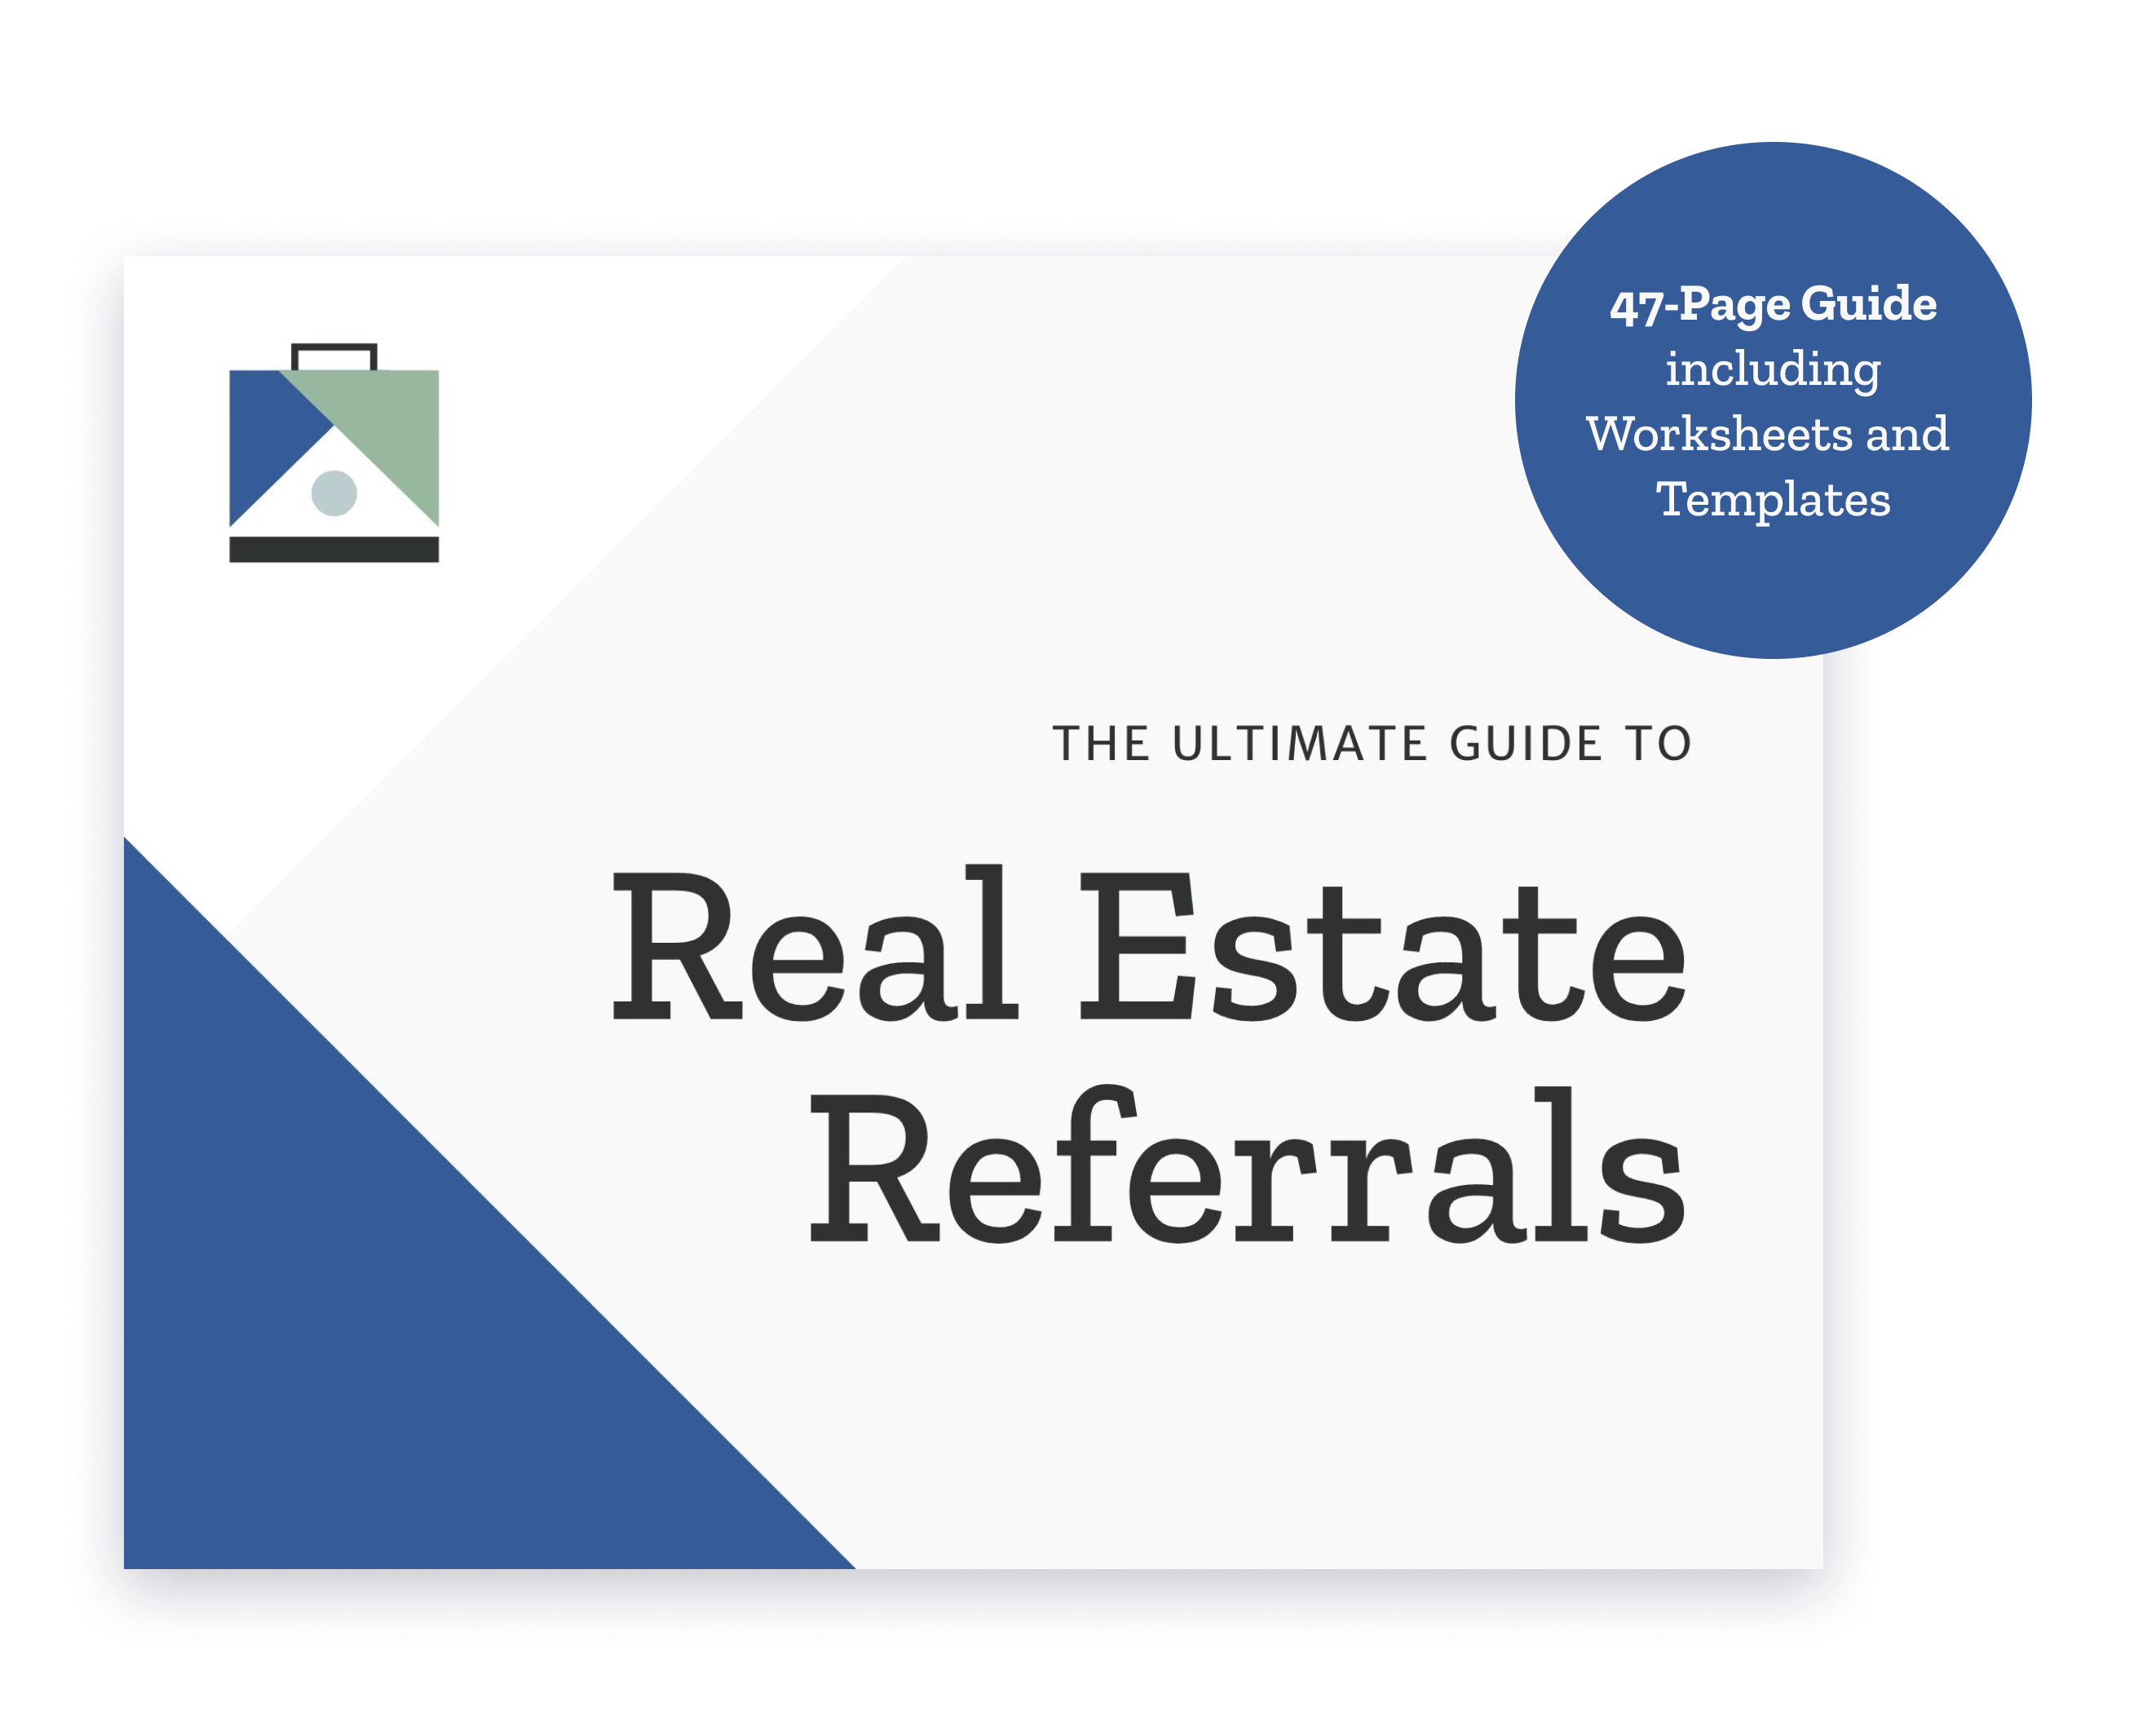 Cover of the Ultimate Guide to Real Estate Referrals includes 47 pages of content plus worksheets and templates